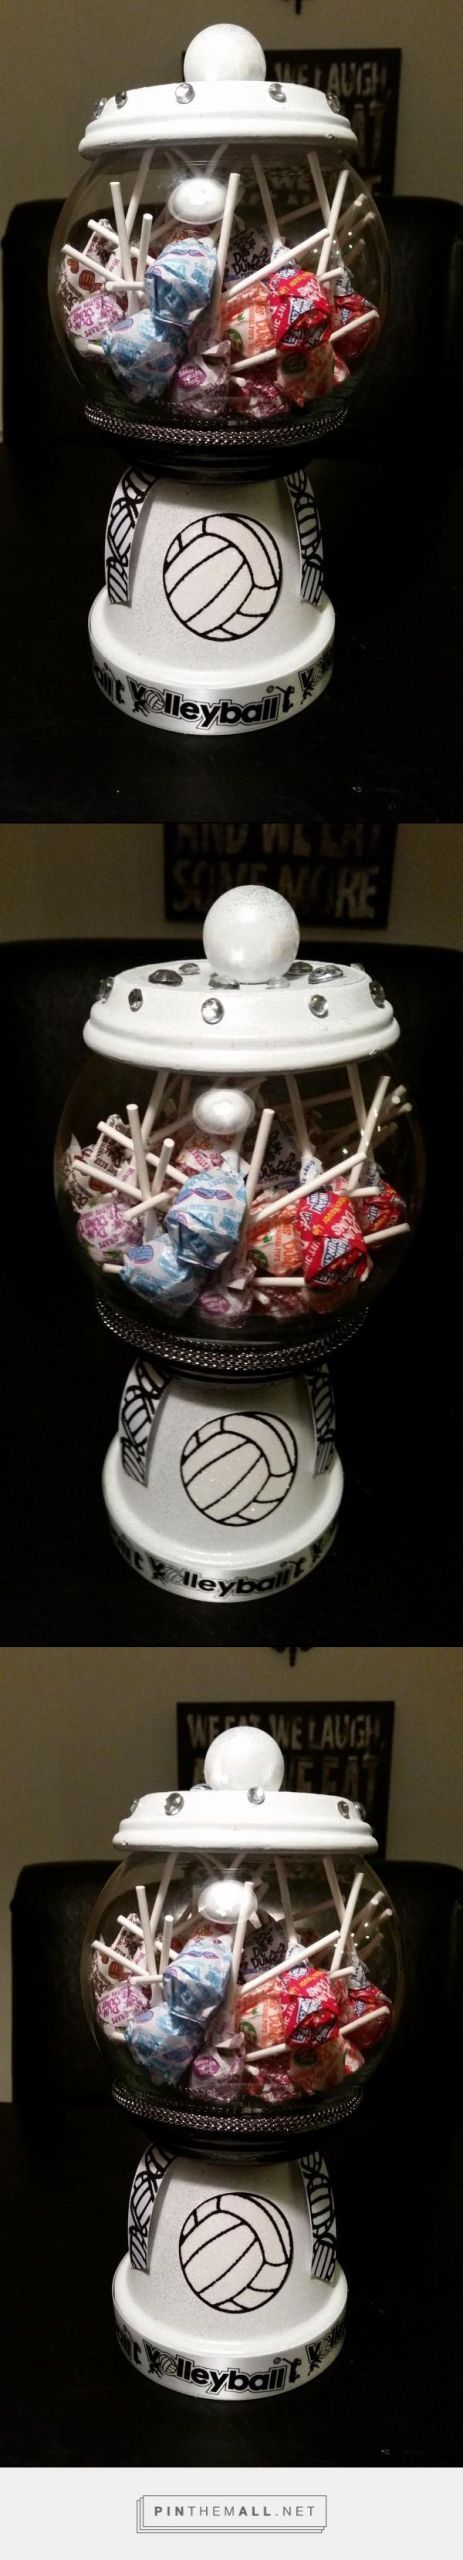 DIY Volleyball Gifts
 Best 25 Volleyball ts ideas on Pinterest